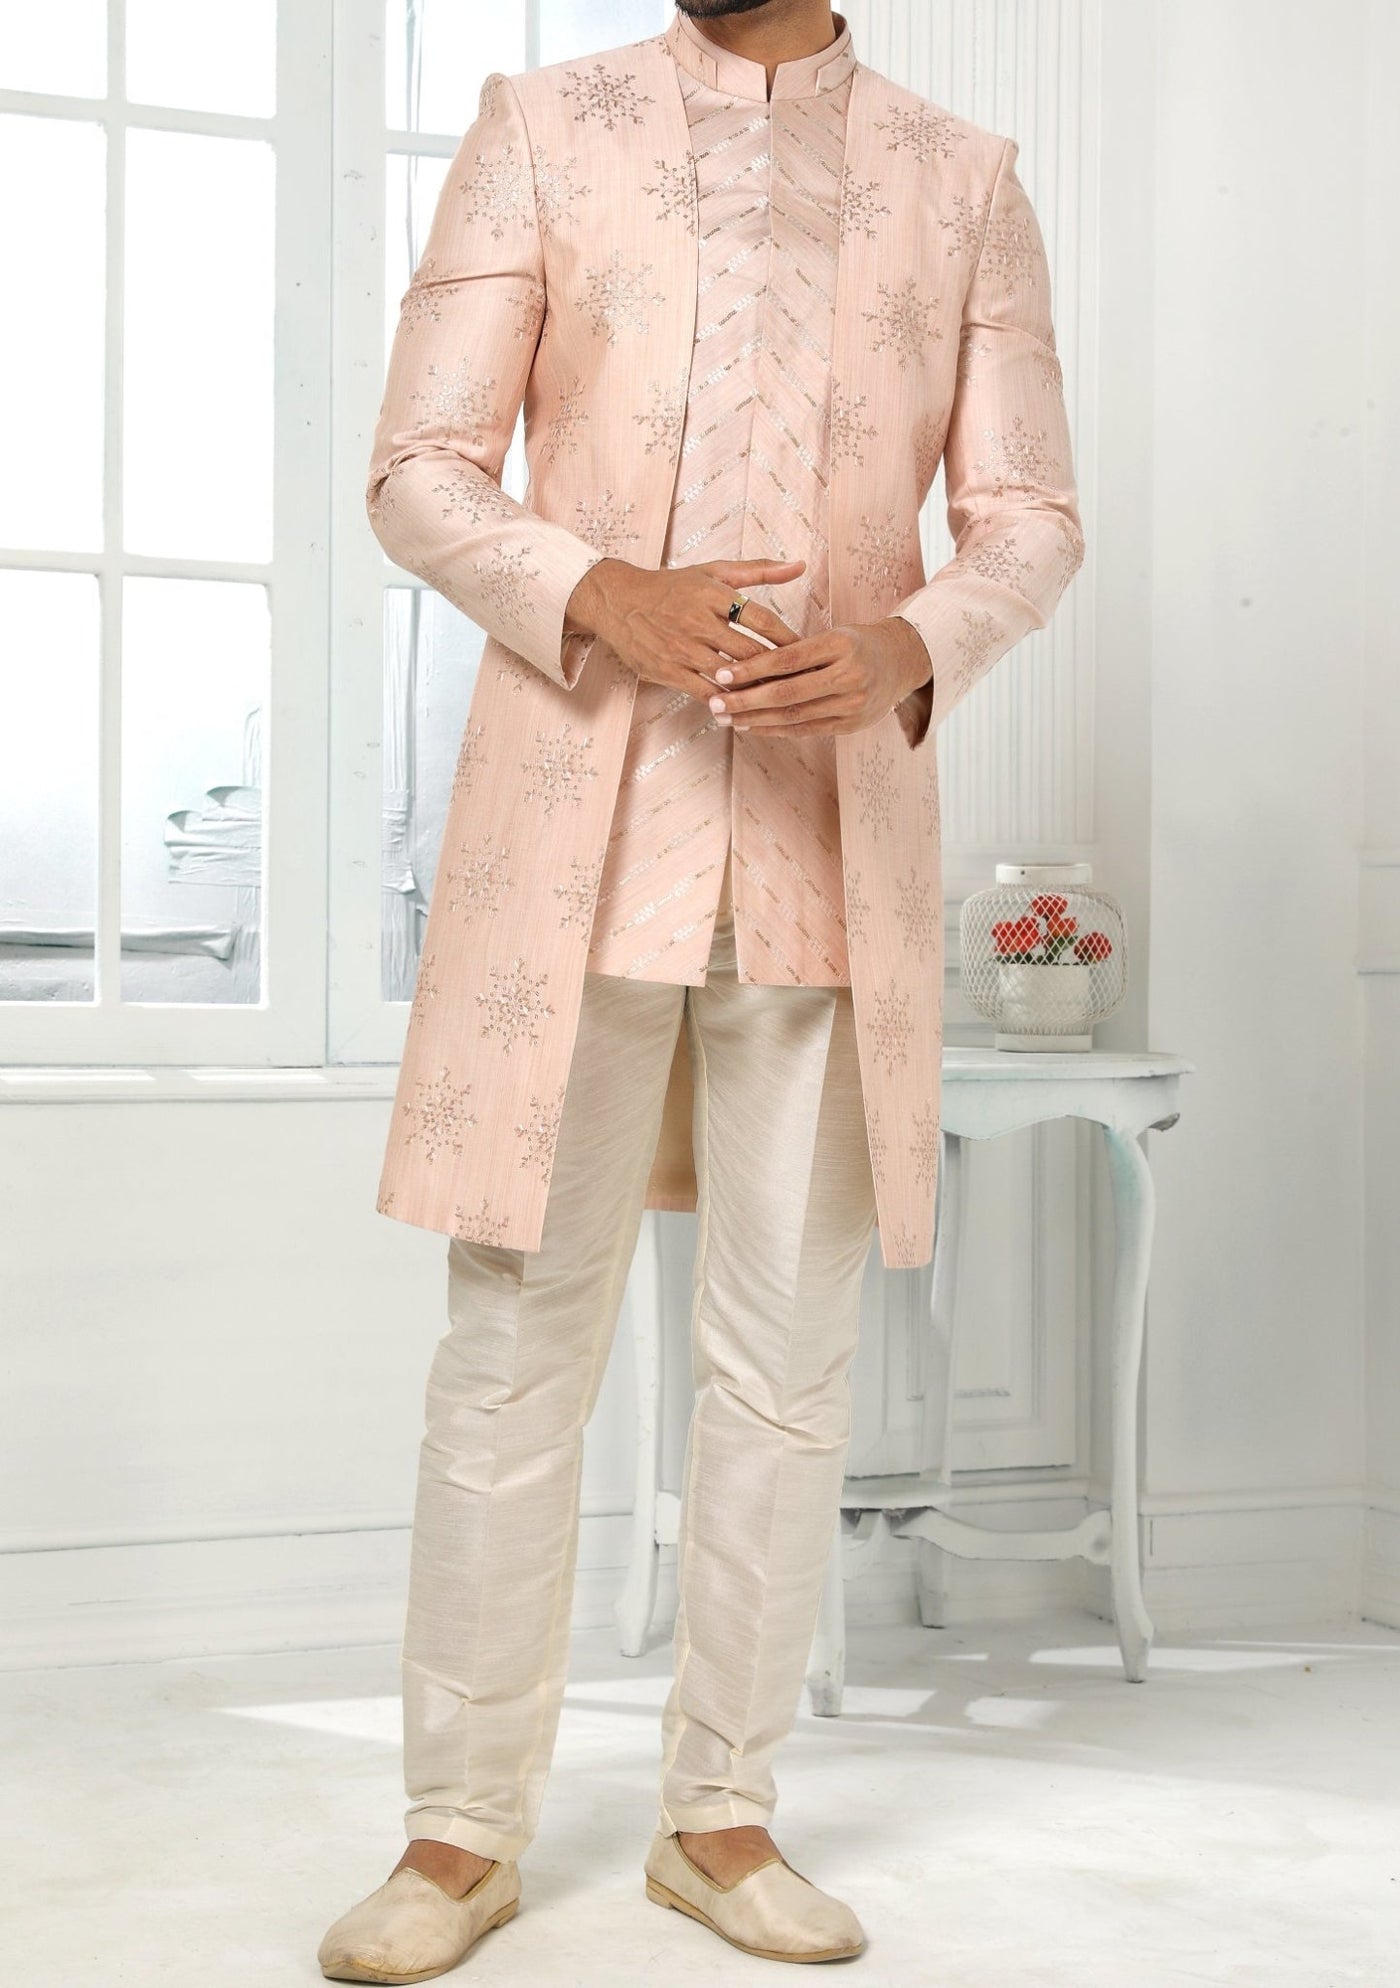 Men's Indo Western Party Wear Sherwani Suit With Jacket - db20434